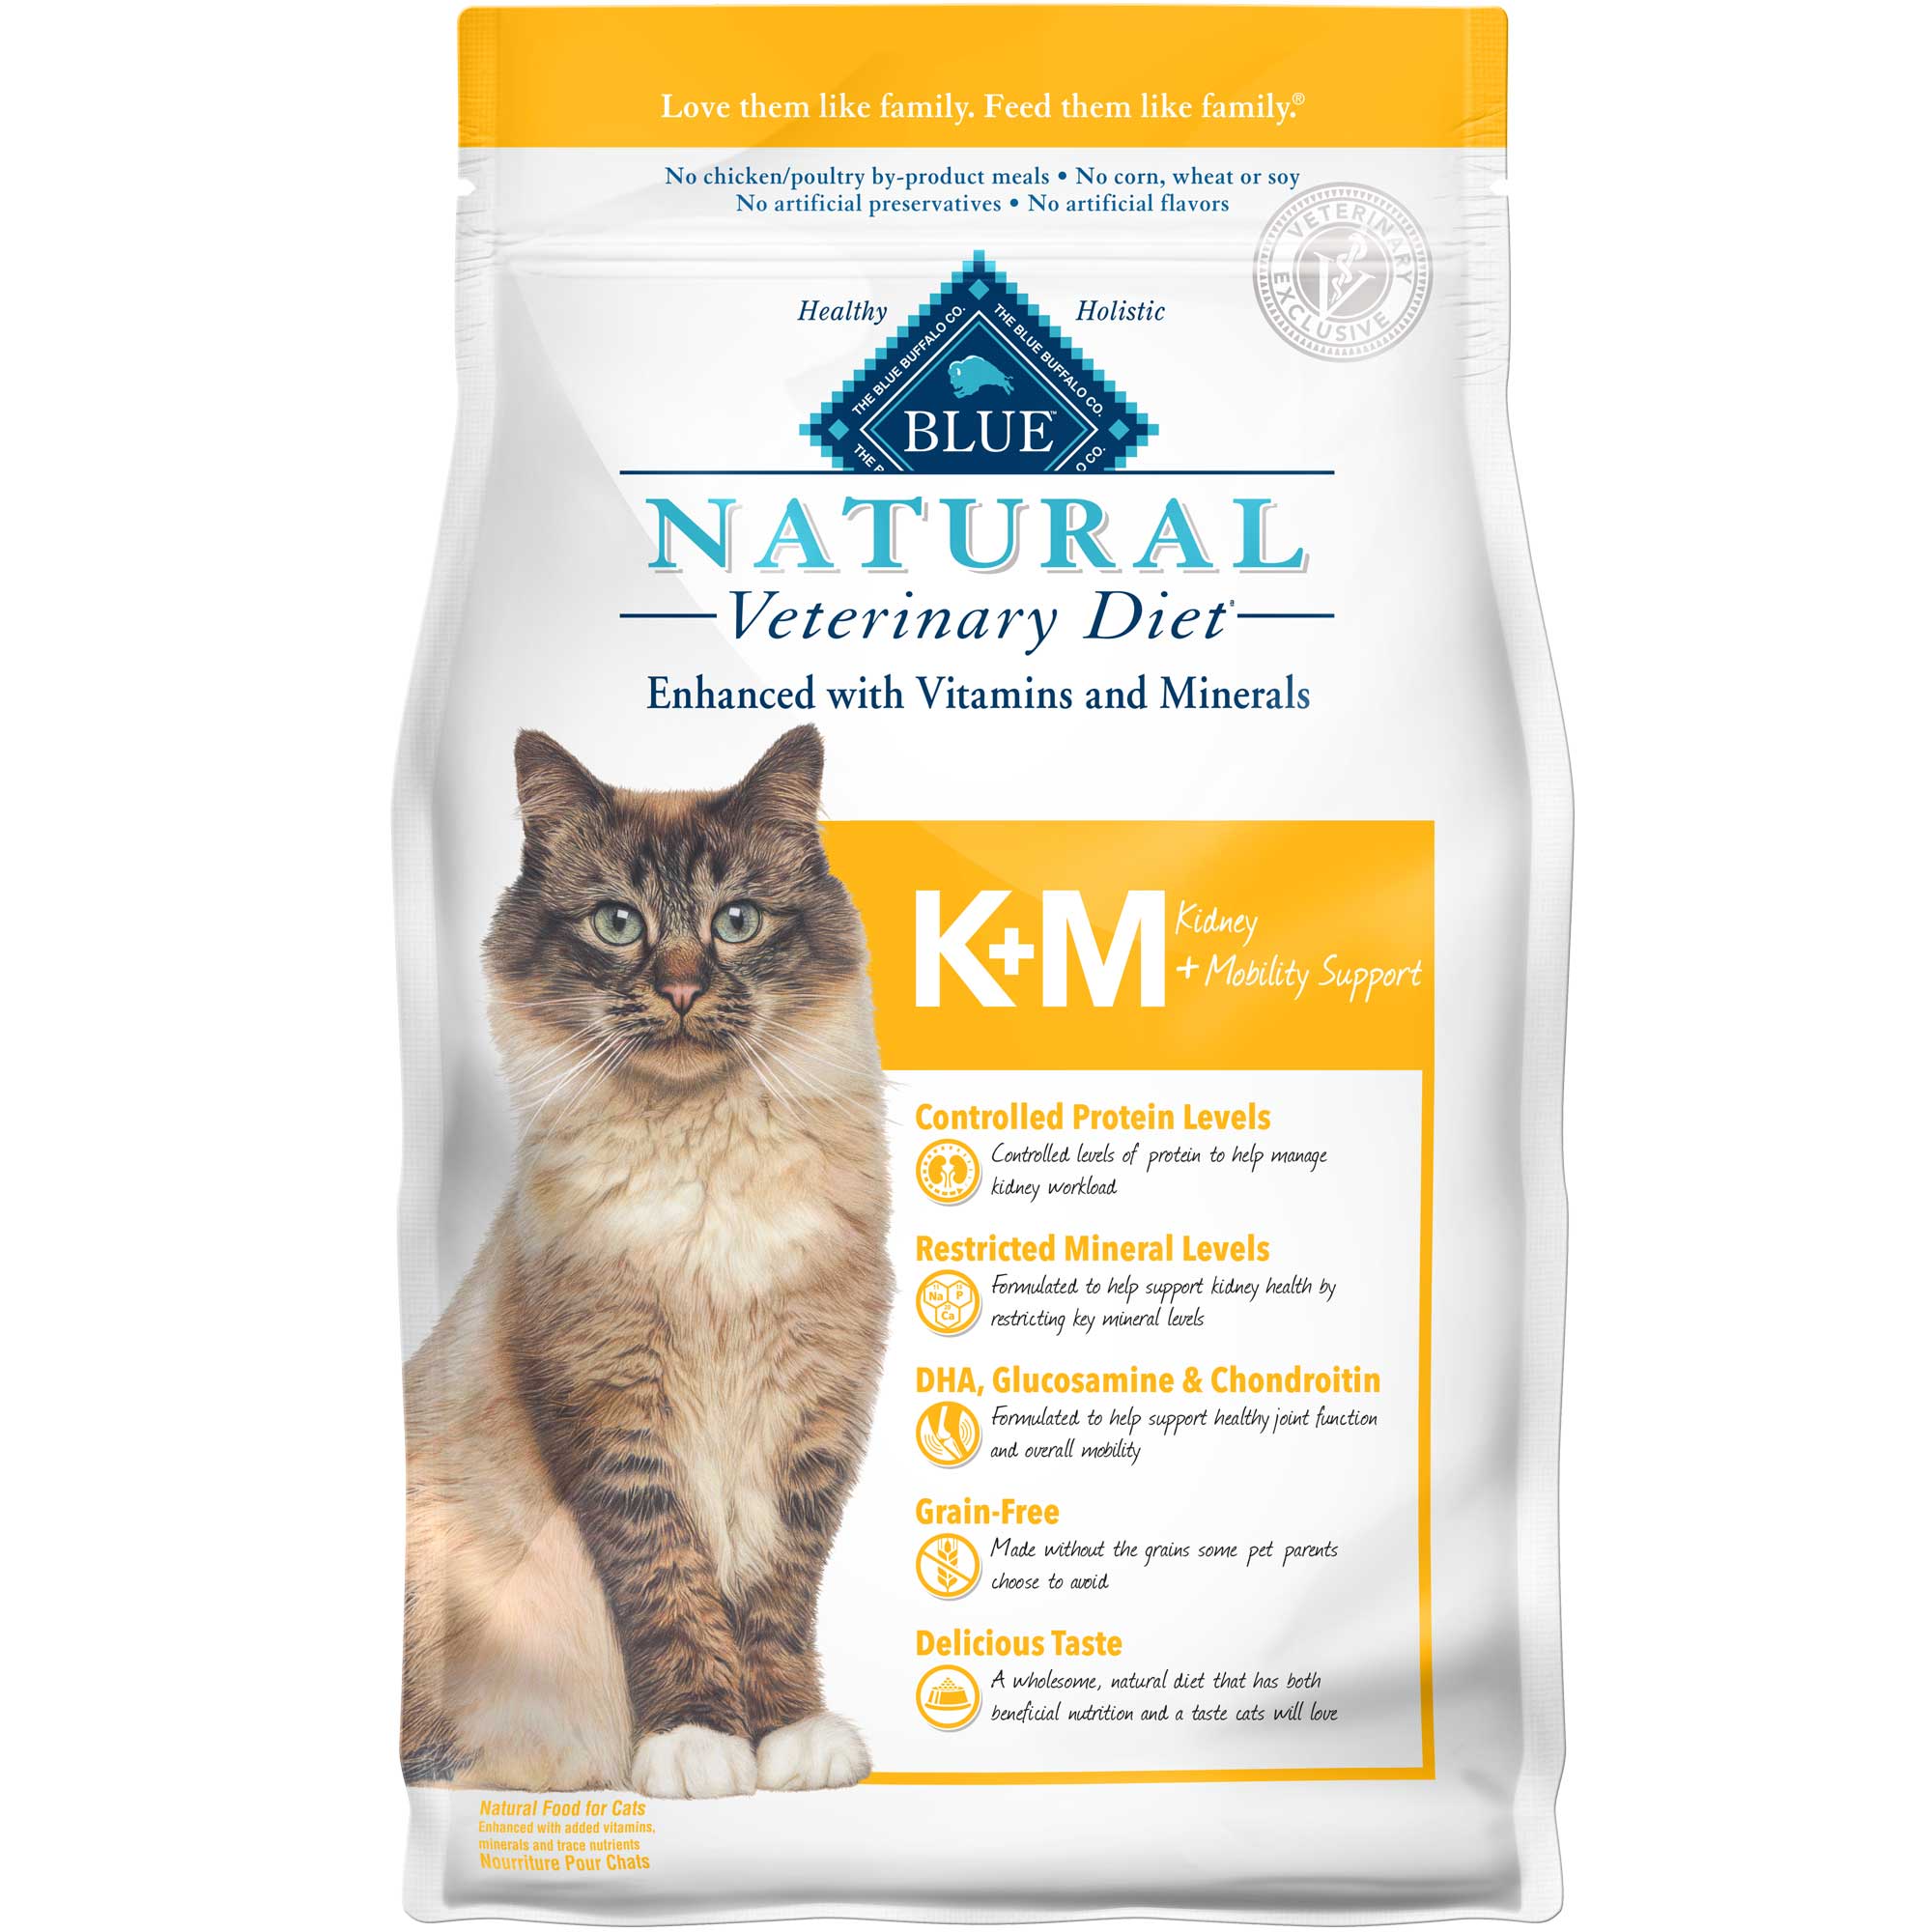 BLUE Natural Veterinary Diet K+M Kidney + Mobility Support Dry Cat Food Usage